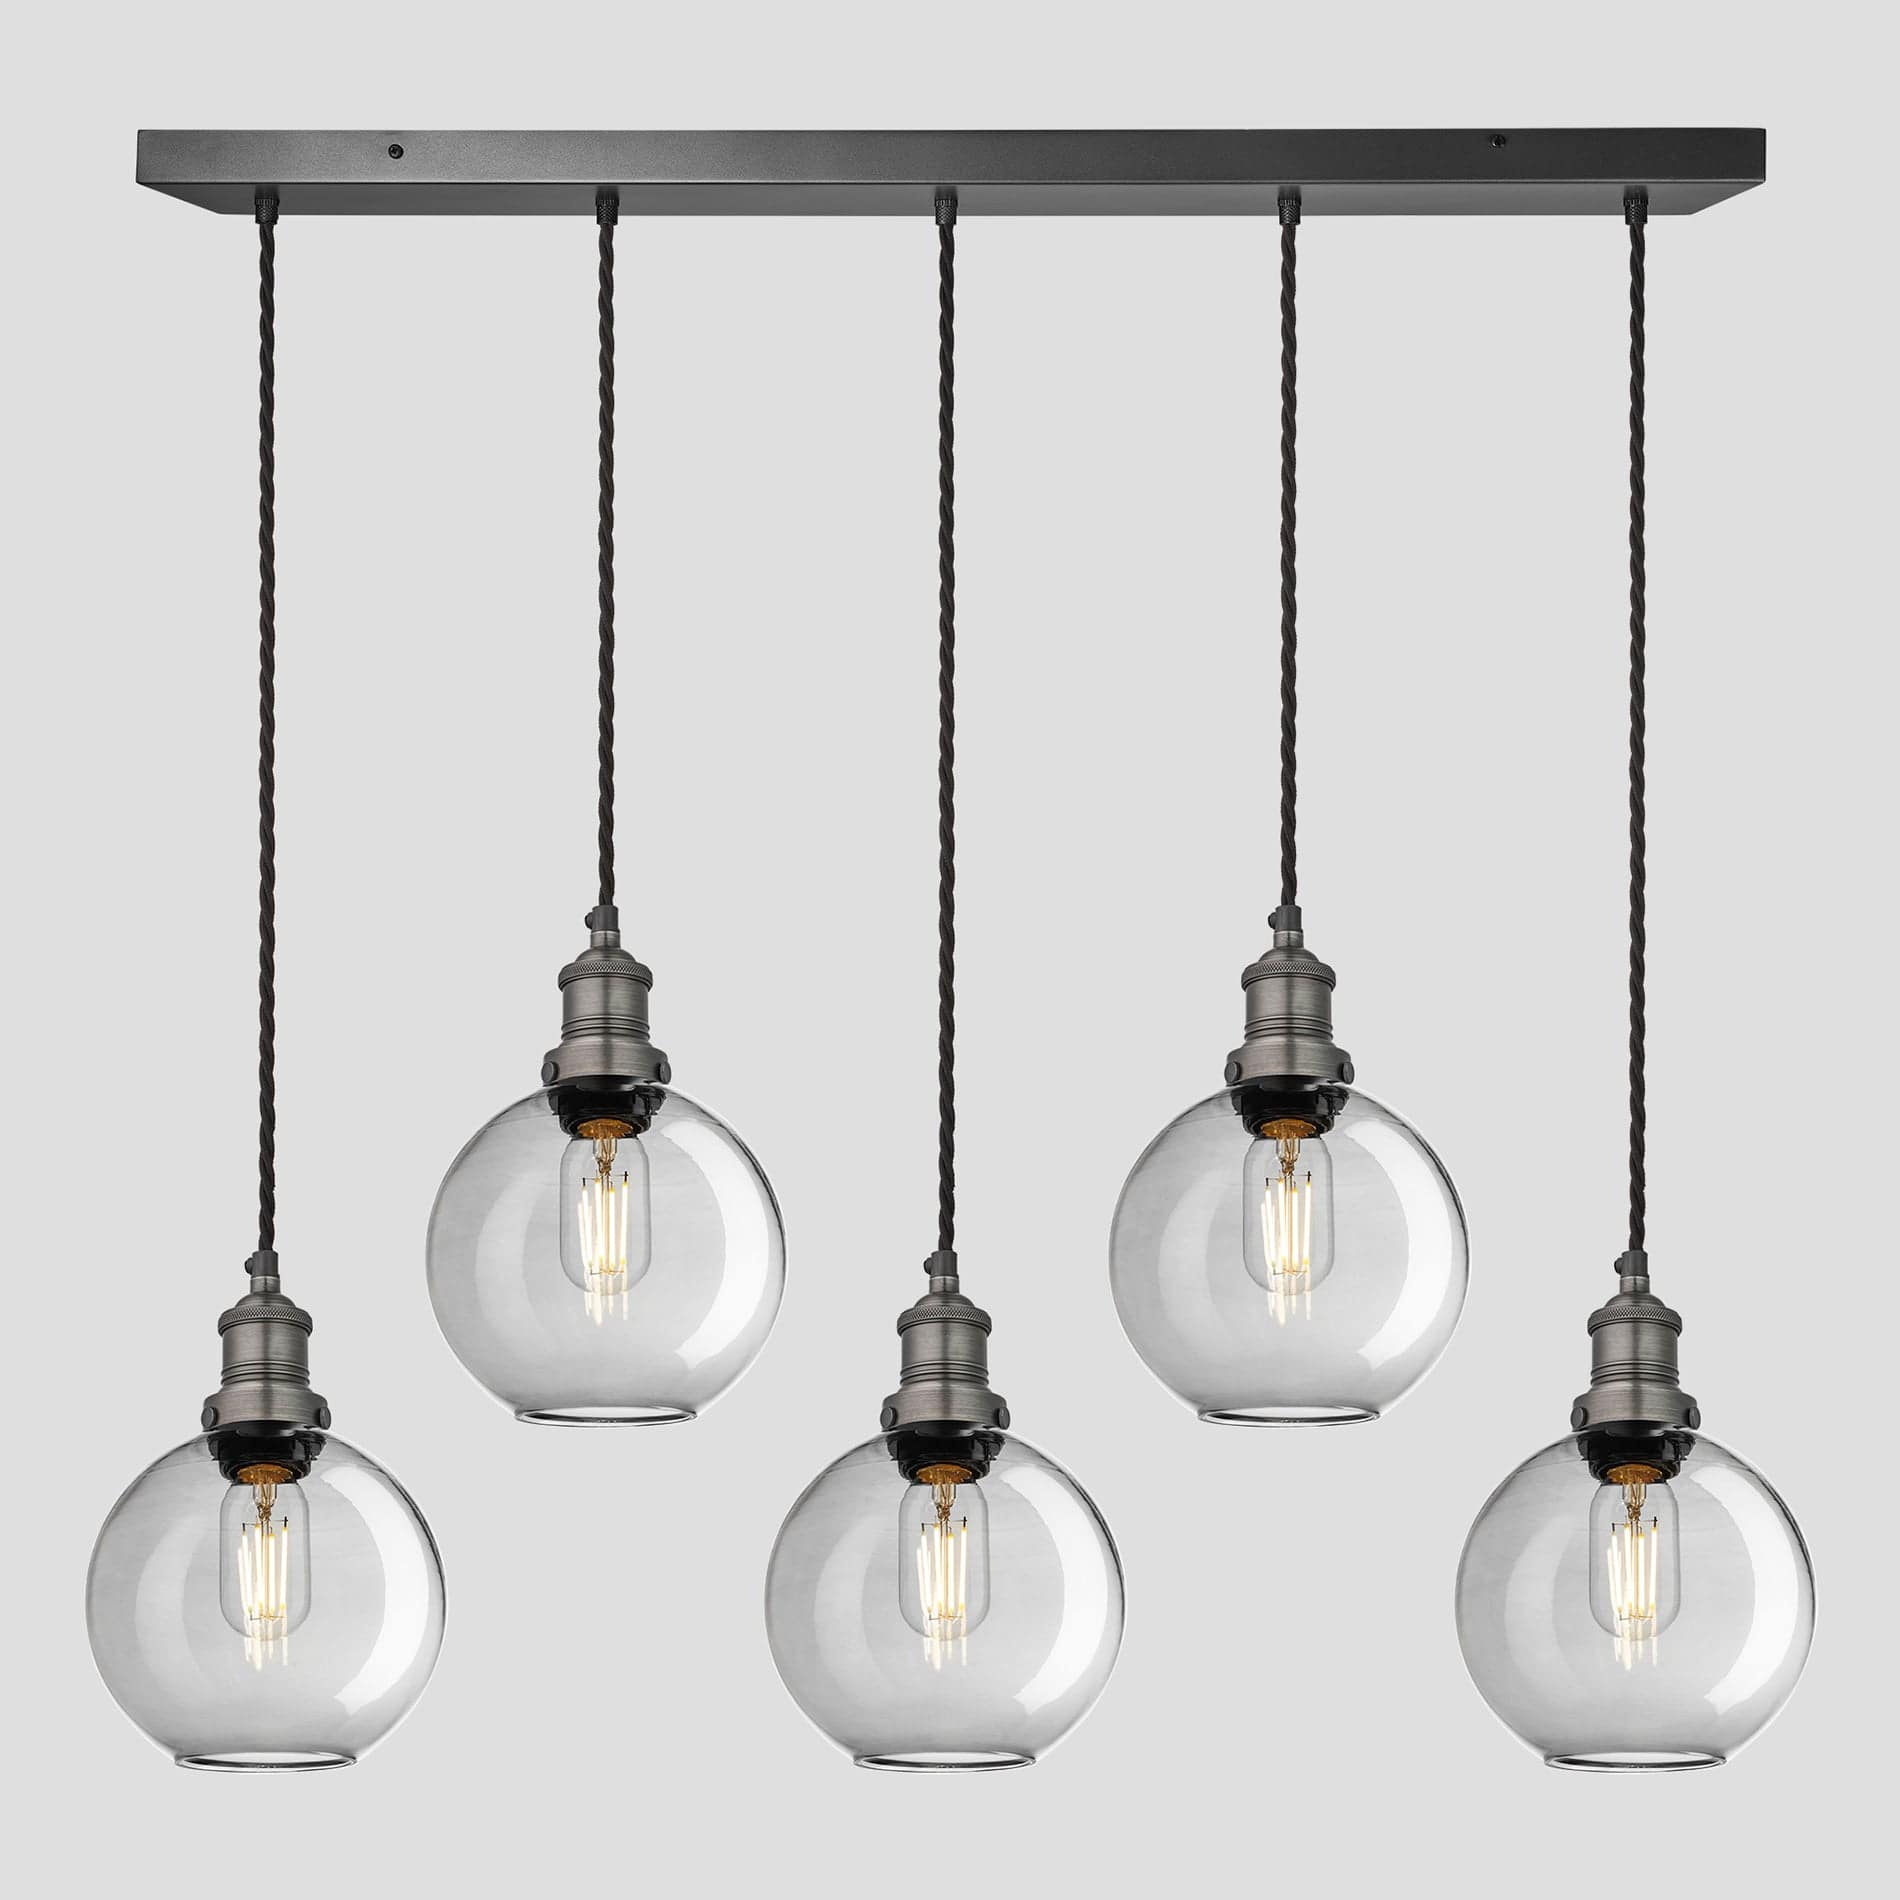 Brooklyn Tinted Glass Globe 5 Wire Cluster Lights - 7 inch - Smoke Grey Industville BR-TGL-GL7-5WCL-SG-PH